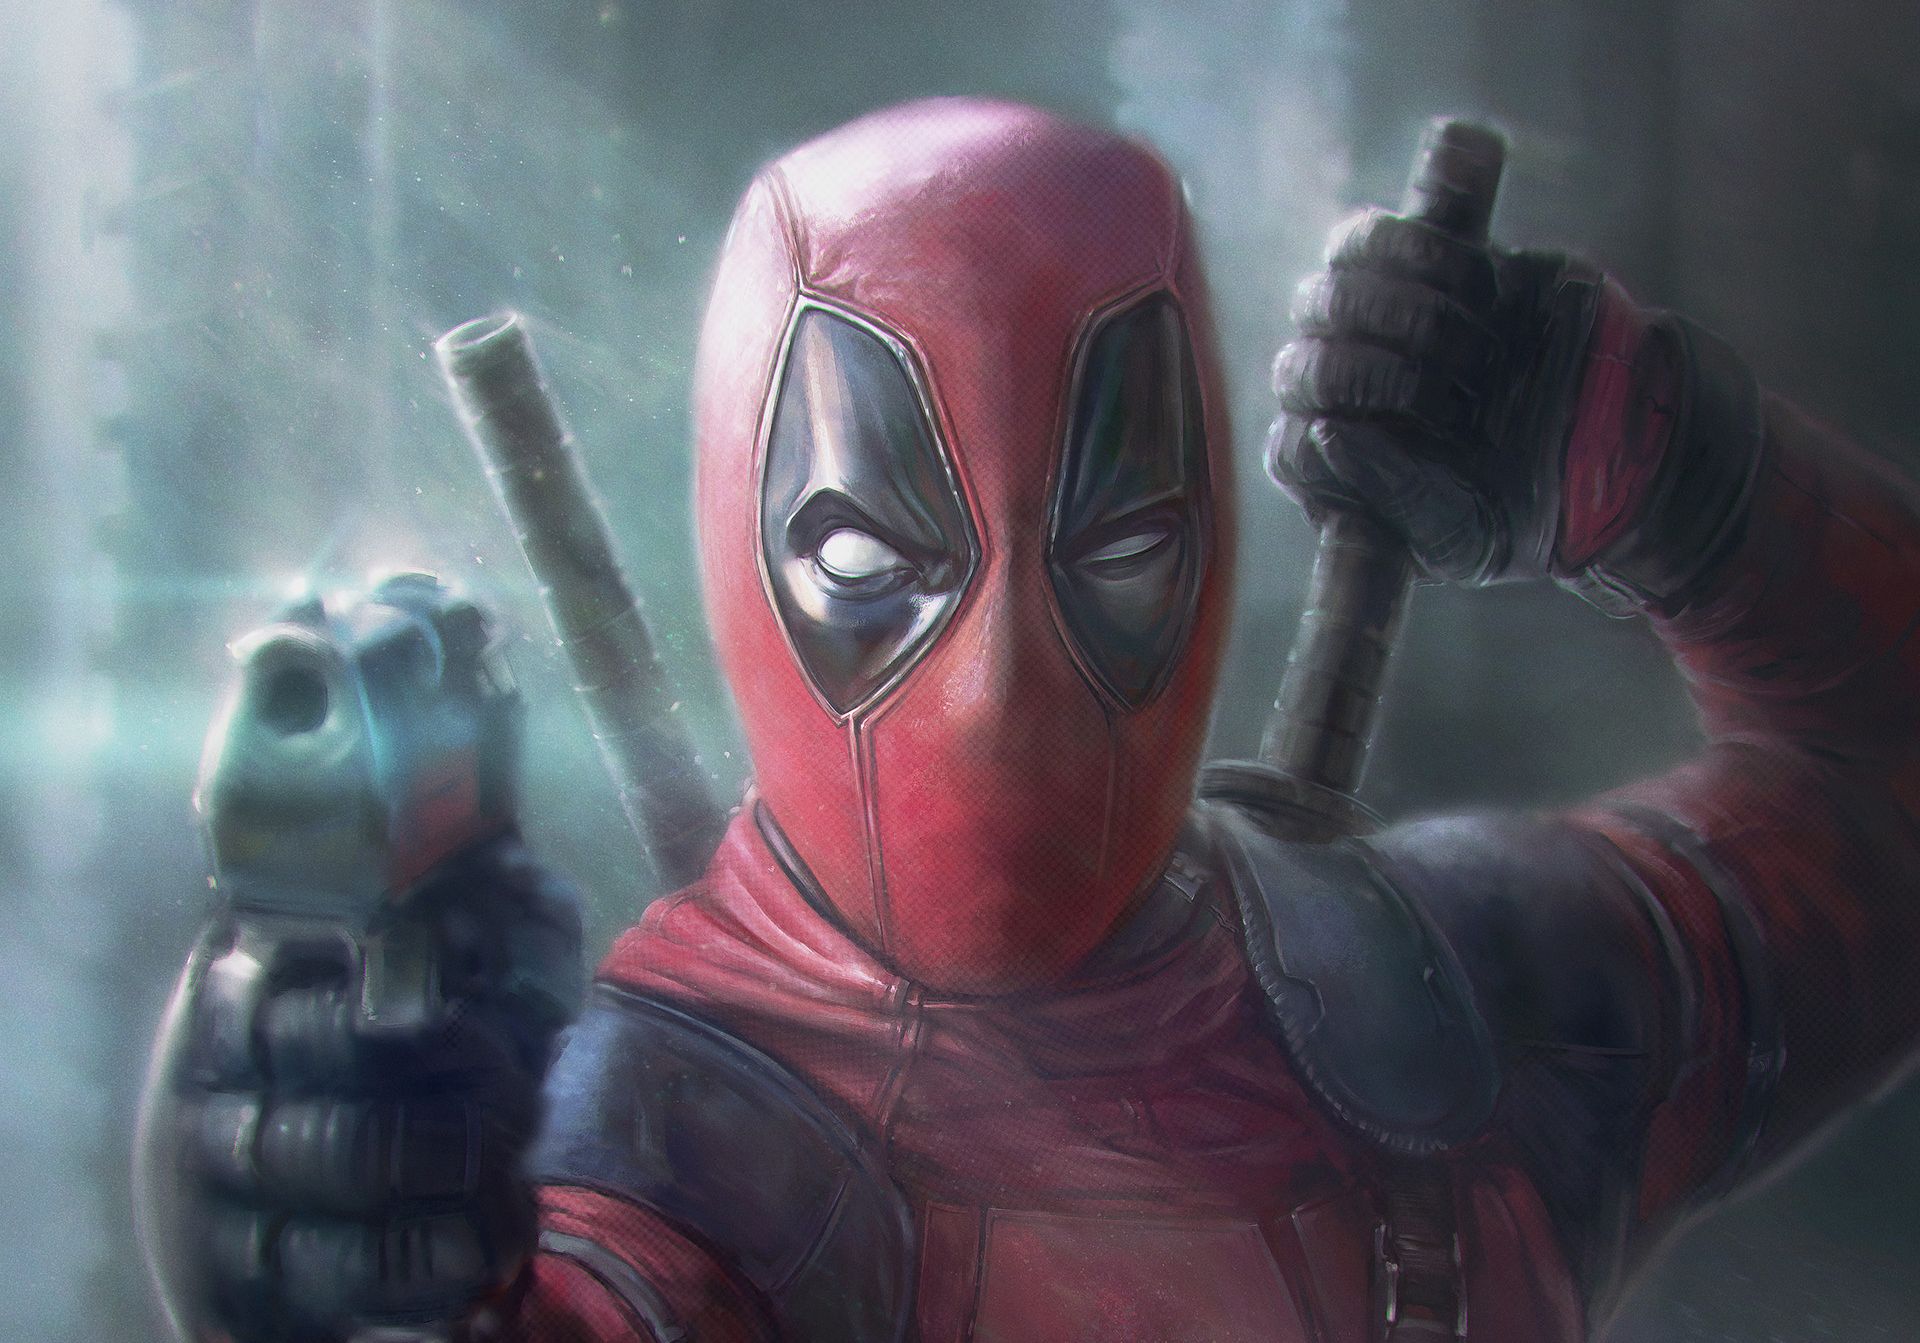 Deadpool Pointing Gun Artwork, HD Superheroes, 4k Wallpaper, Image, Background, Photo and Picture